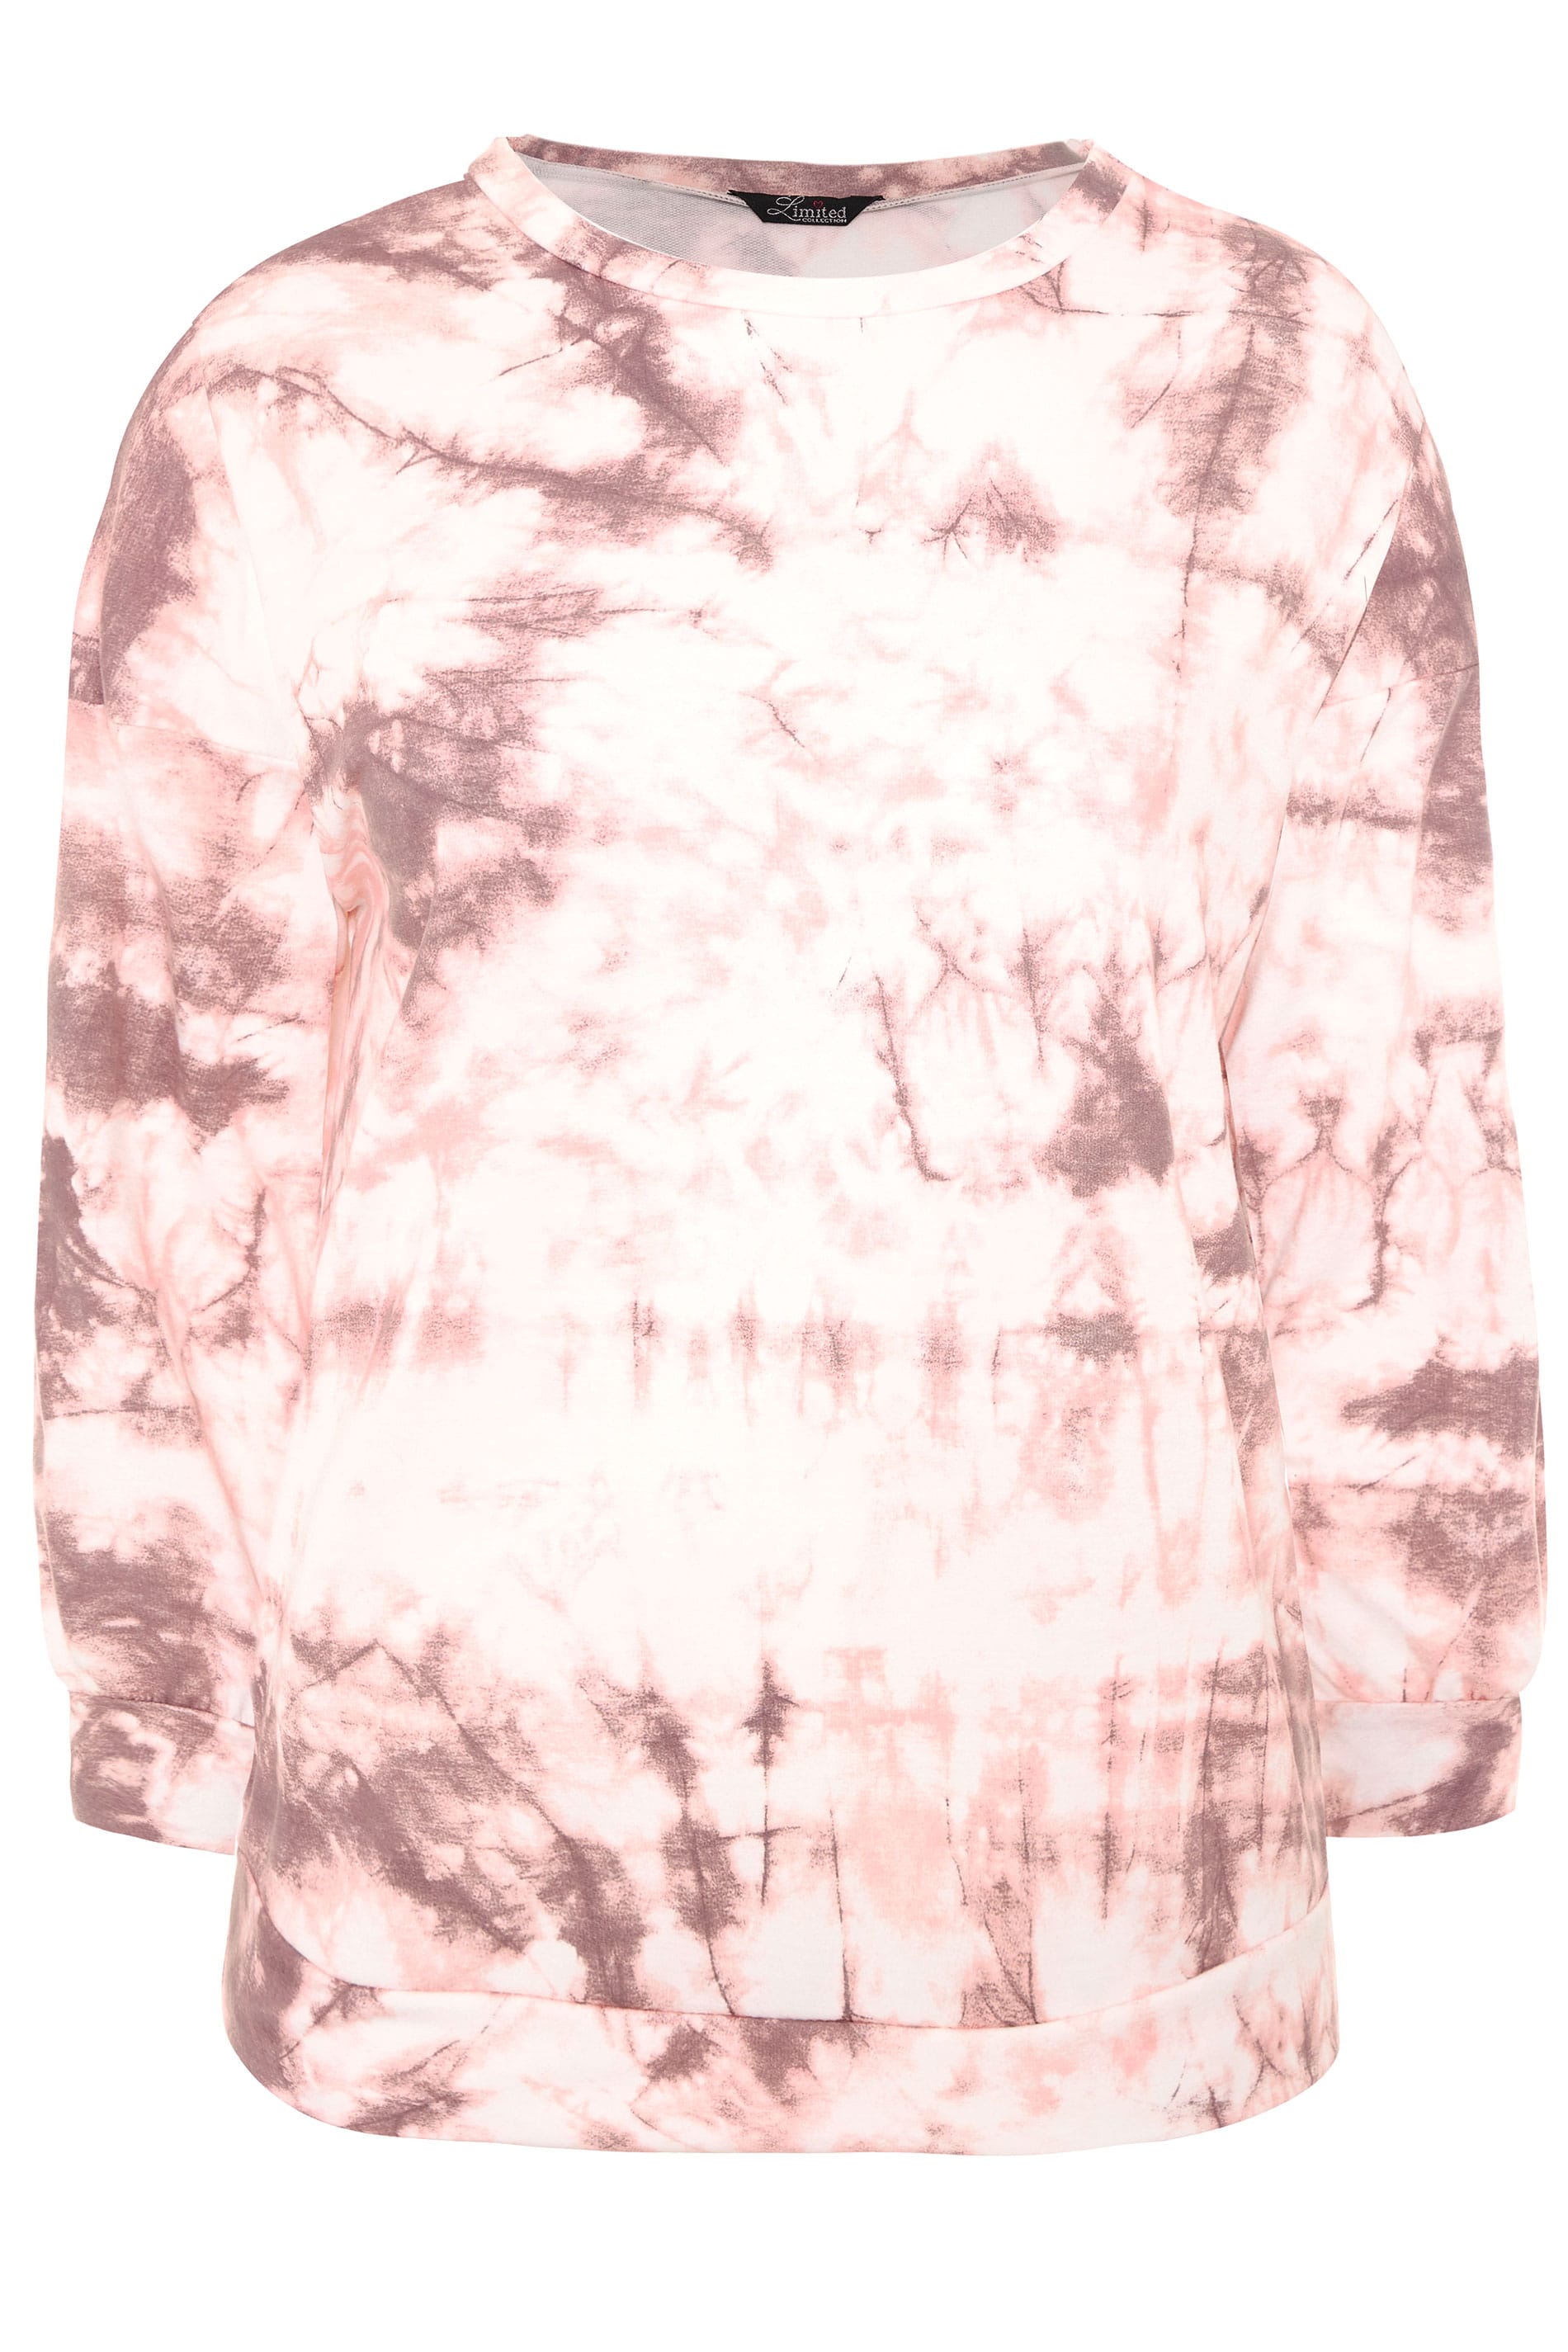 Yours Clothing collection limitée Tie Dye Sweat